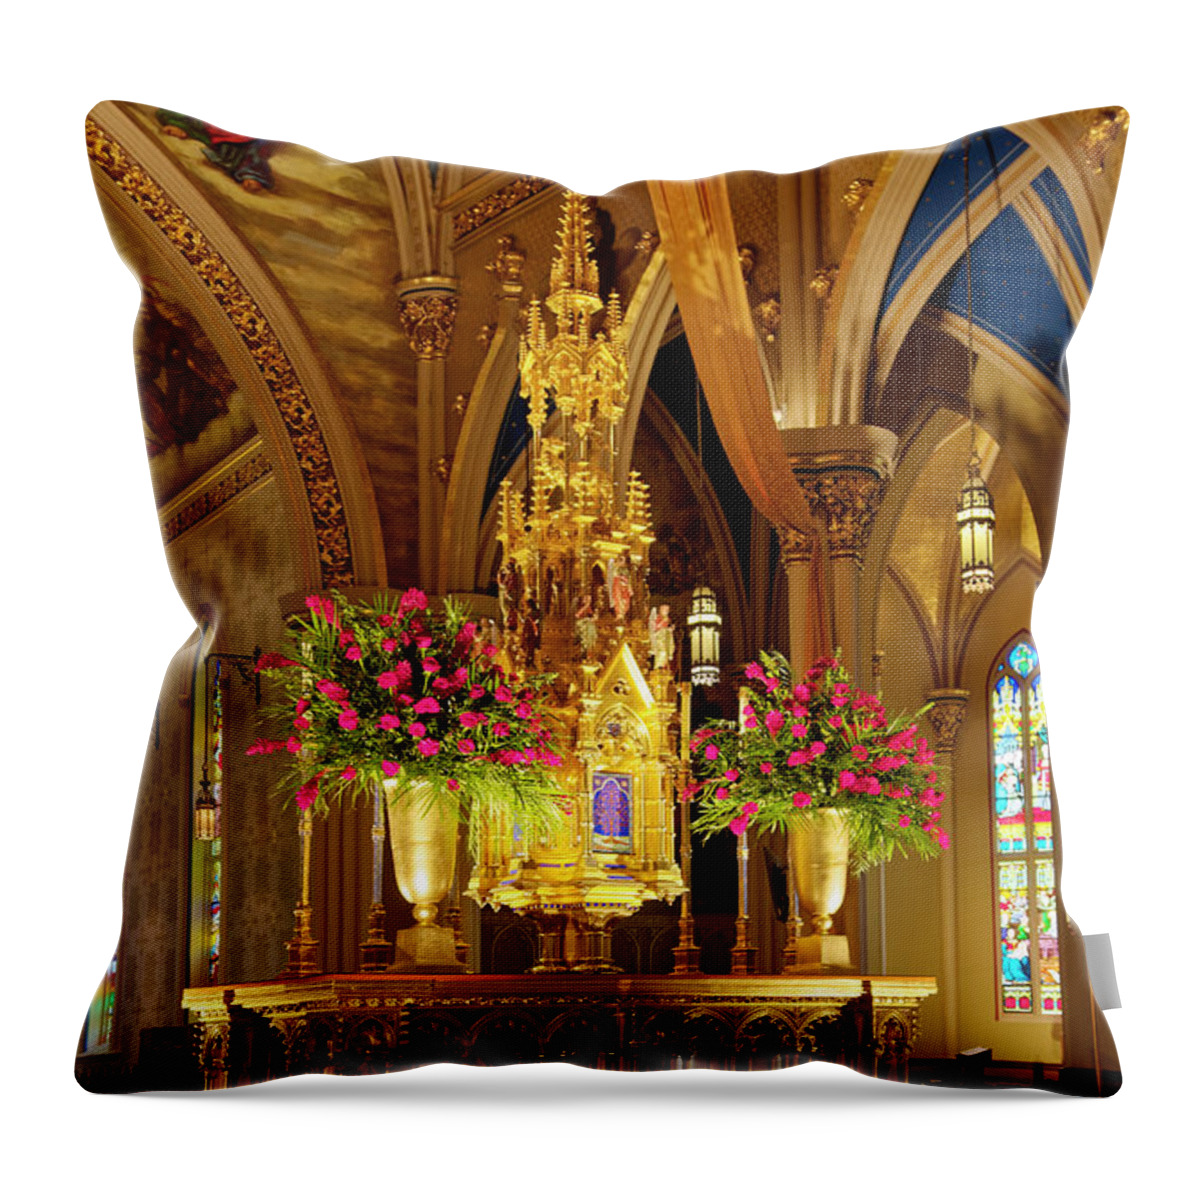 Basilica Of The Sacred Heart Interior Throw Pillow featuring the photograph Basilica of the Sacred Heart Interior by Sally Weigand